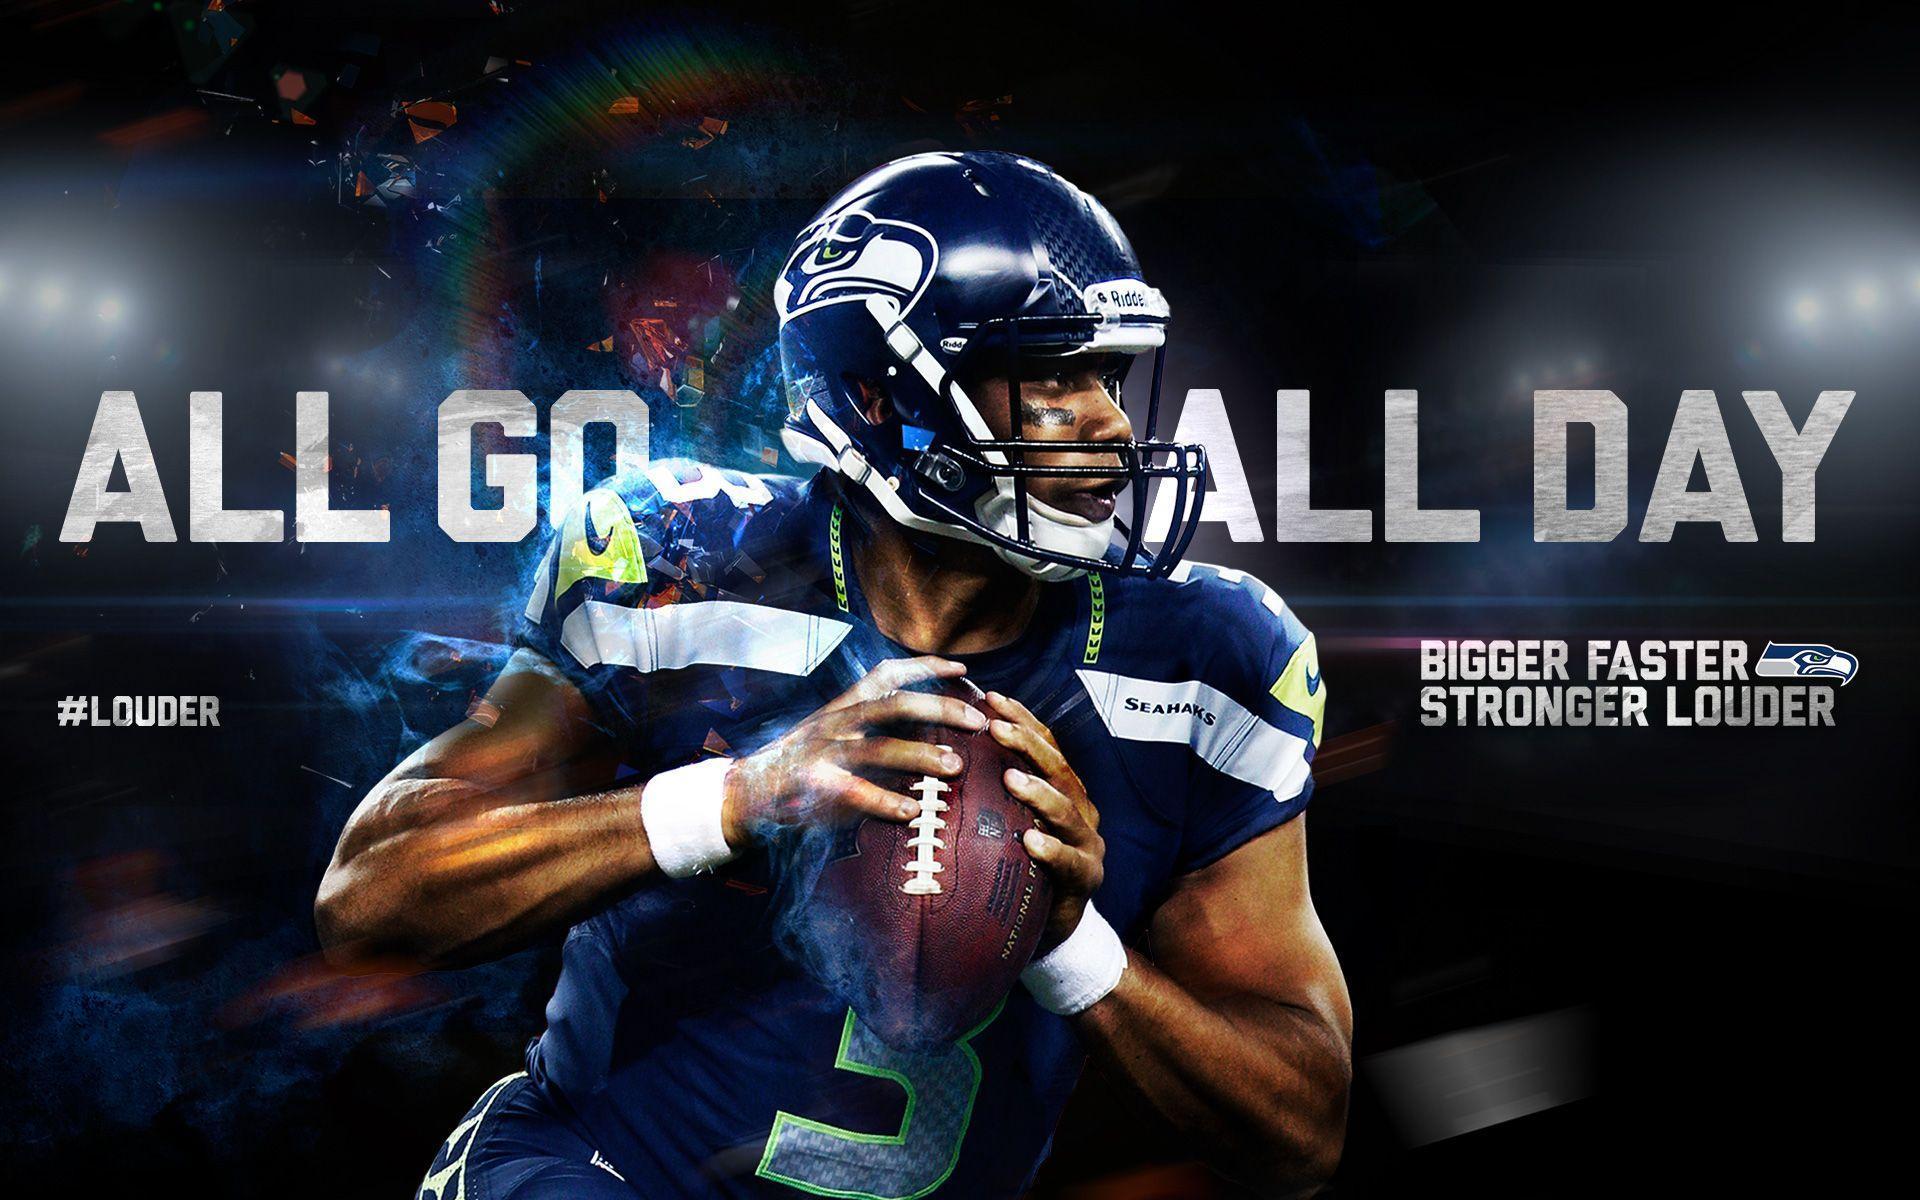 Cool Nfl Wallpapers